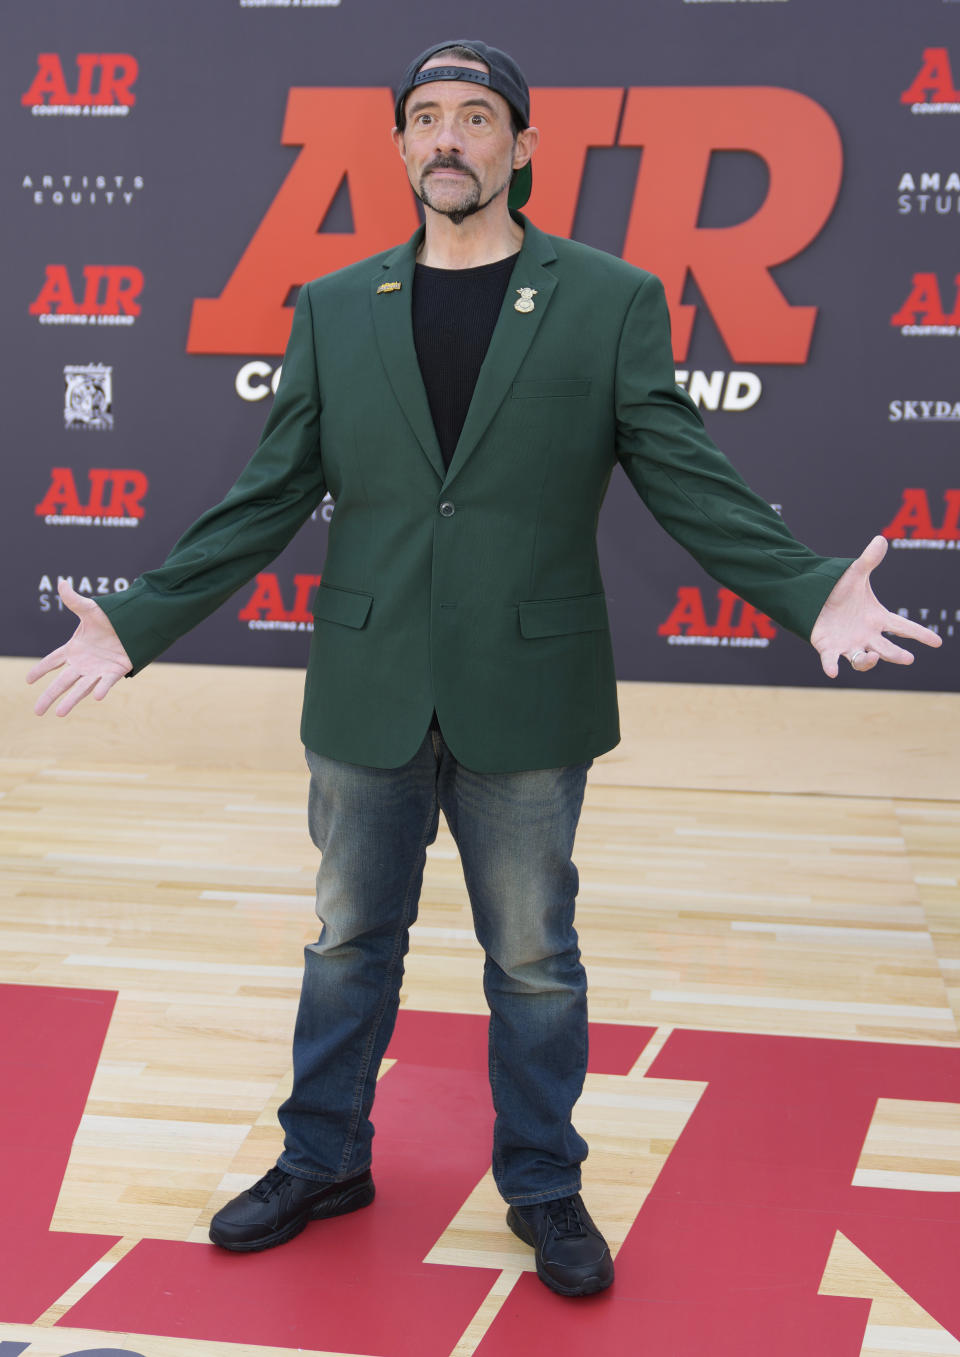 FILE - Kevin Smith arrives at the world premiere of "Air" on Monday, March 27, 2023, in Los Angeles. Smith turns 53 on Aug. 2. (AP Photo/Ashley Landis, File)